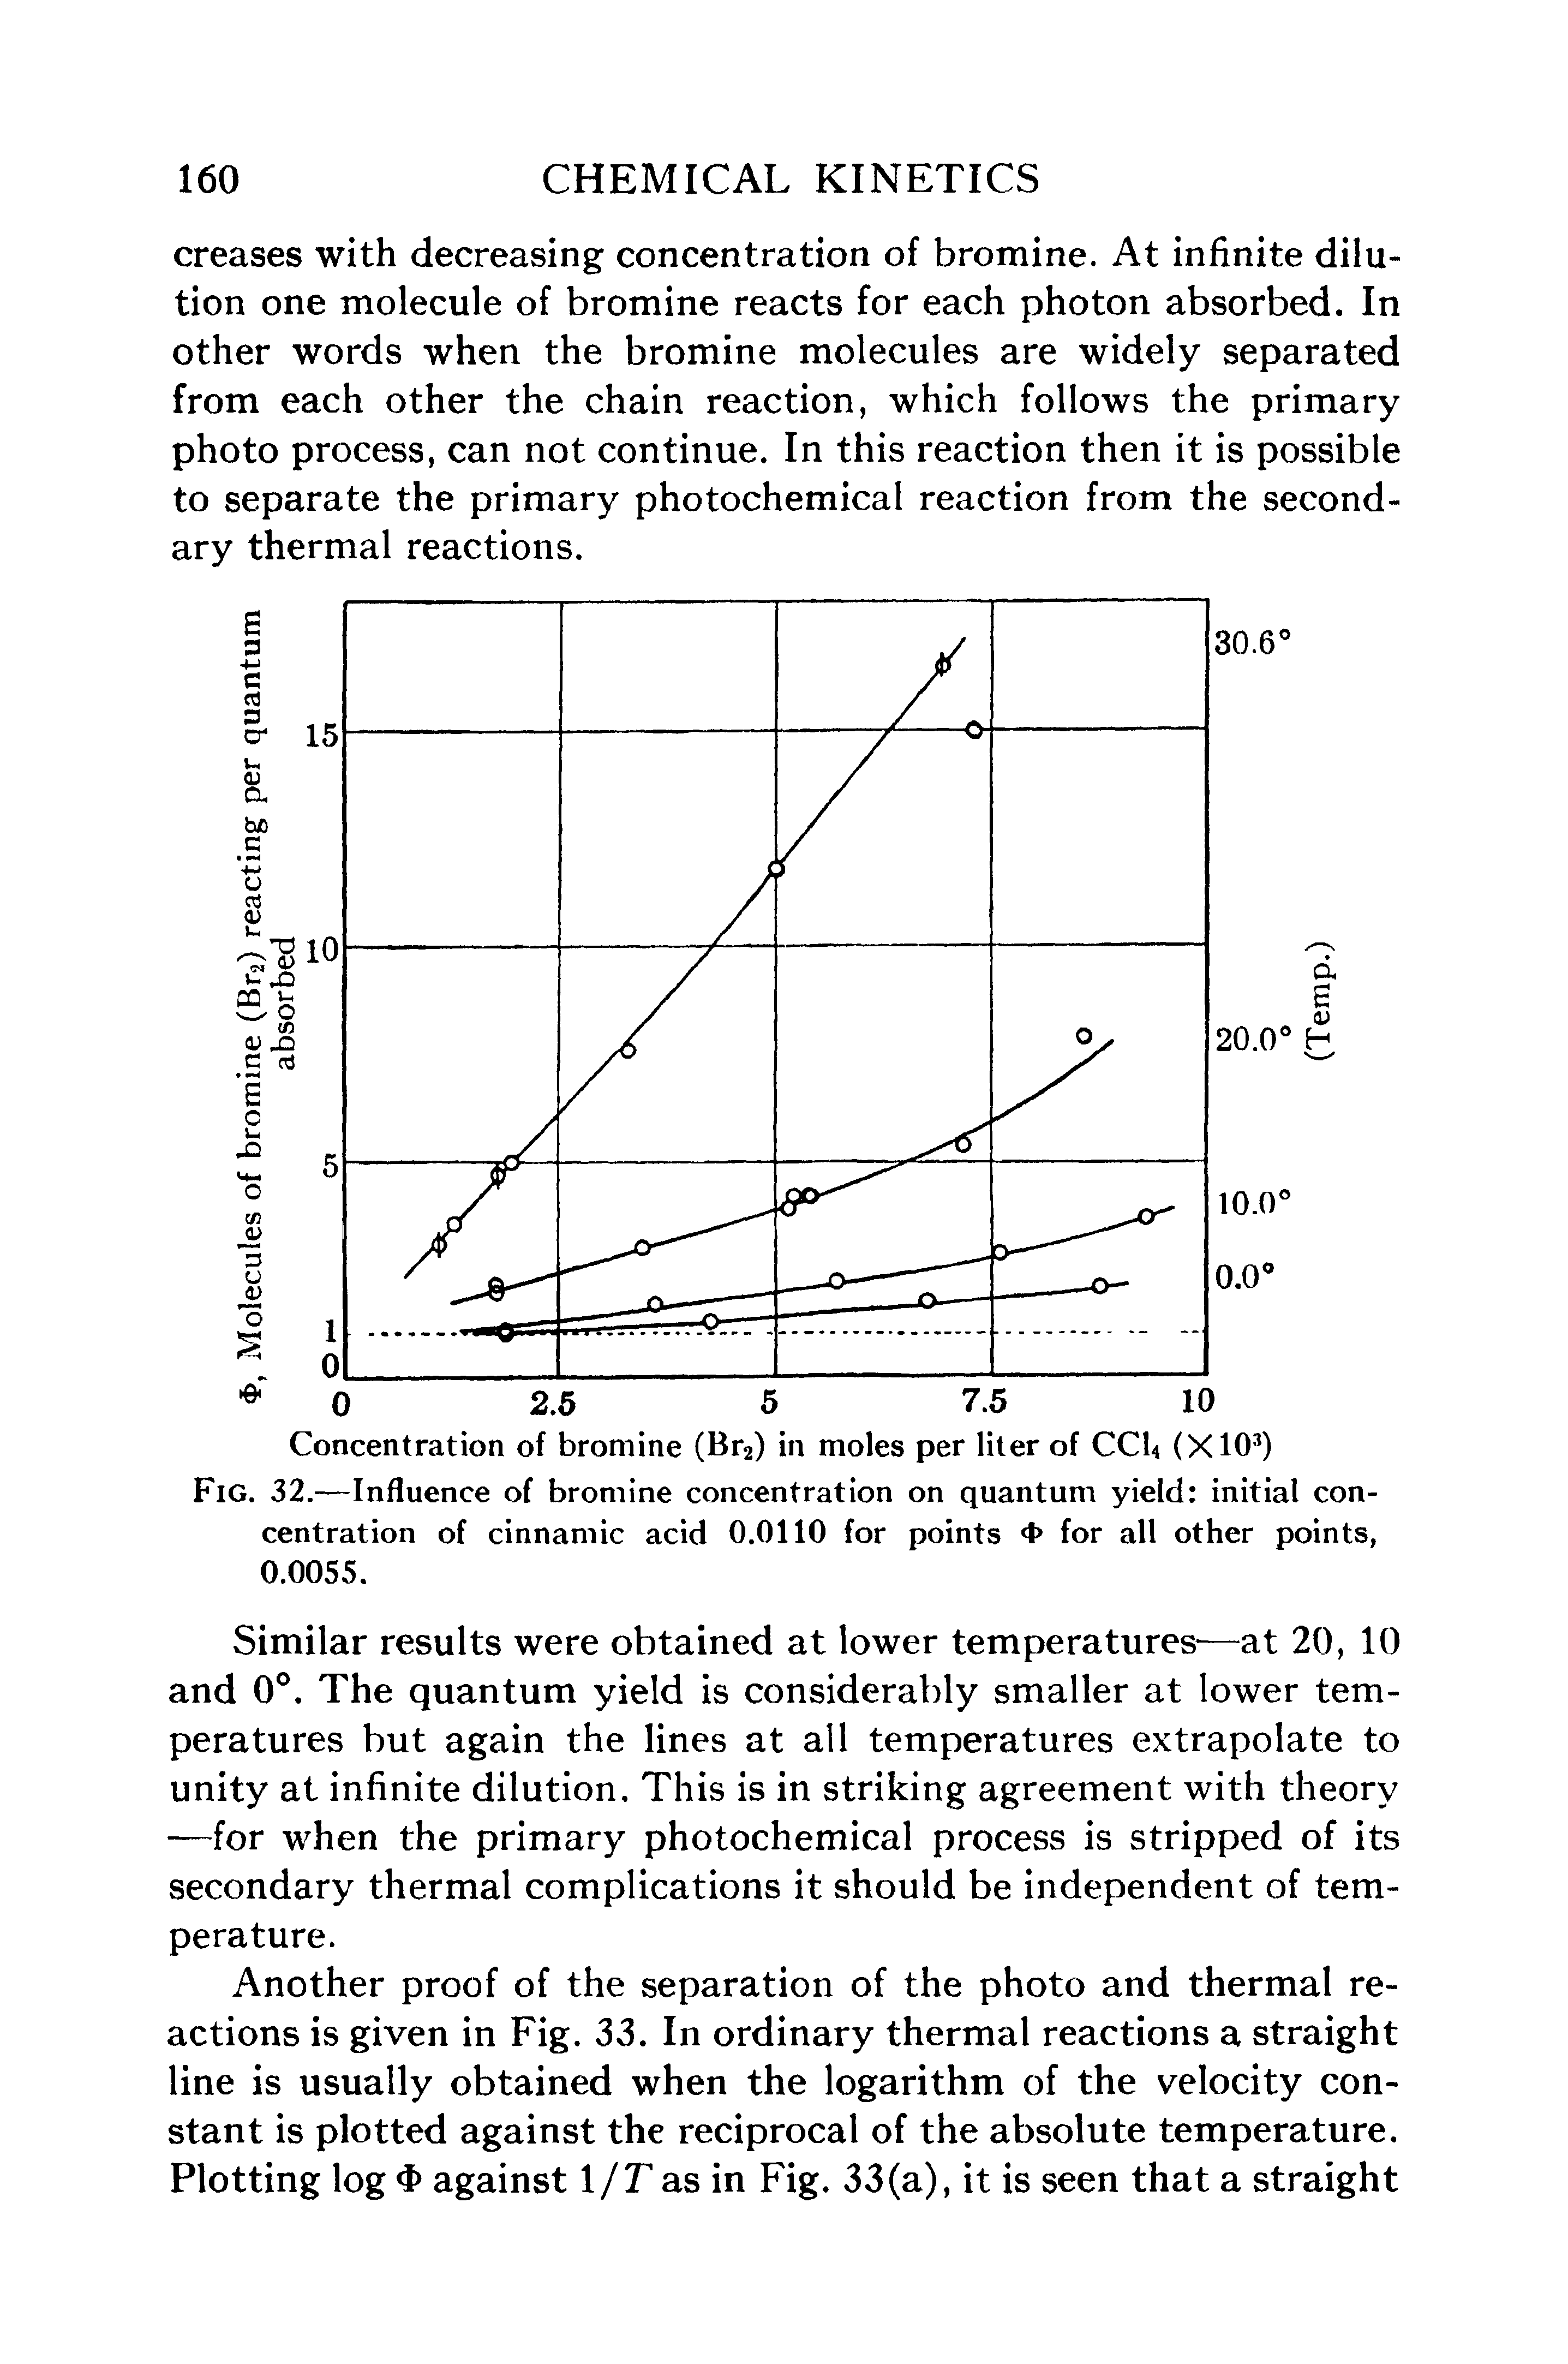 Fig. 32.—Influence of bromine concentration on quantum yield initial concentration of cinnamic acid 0.0110 for points <t> for all other points, 0.0055.